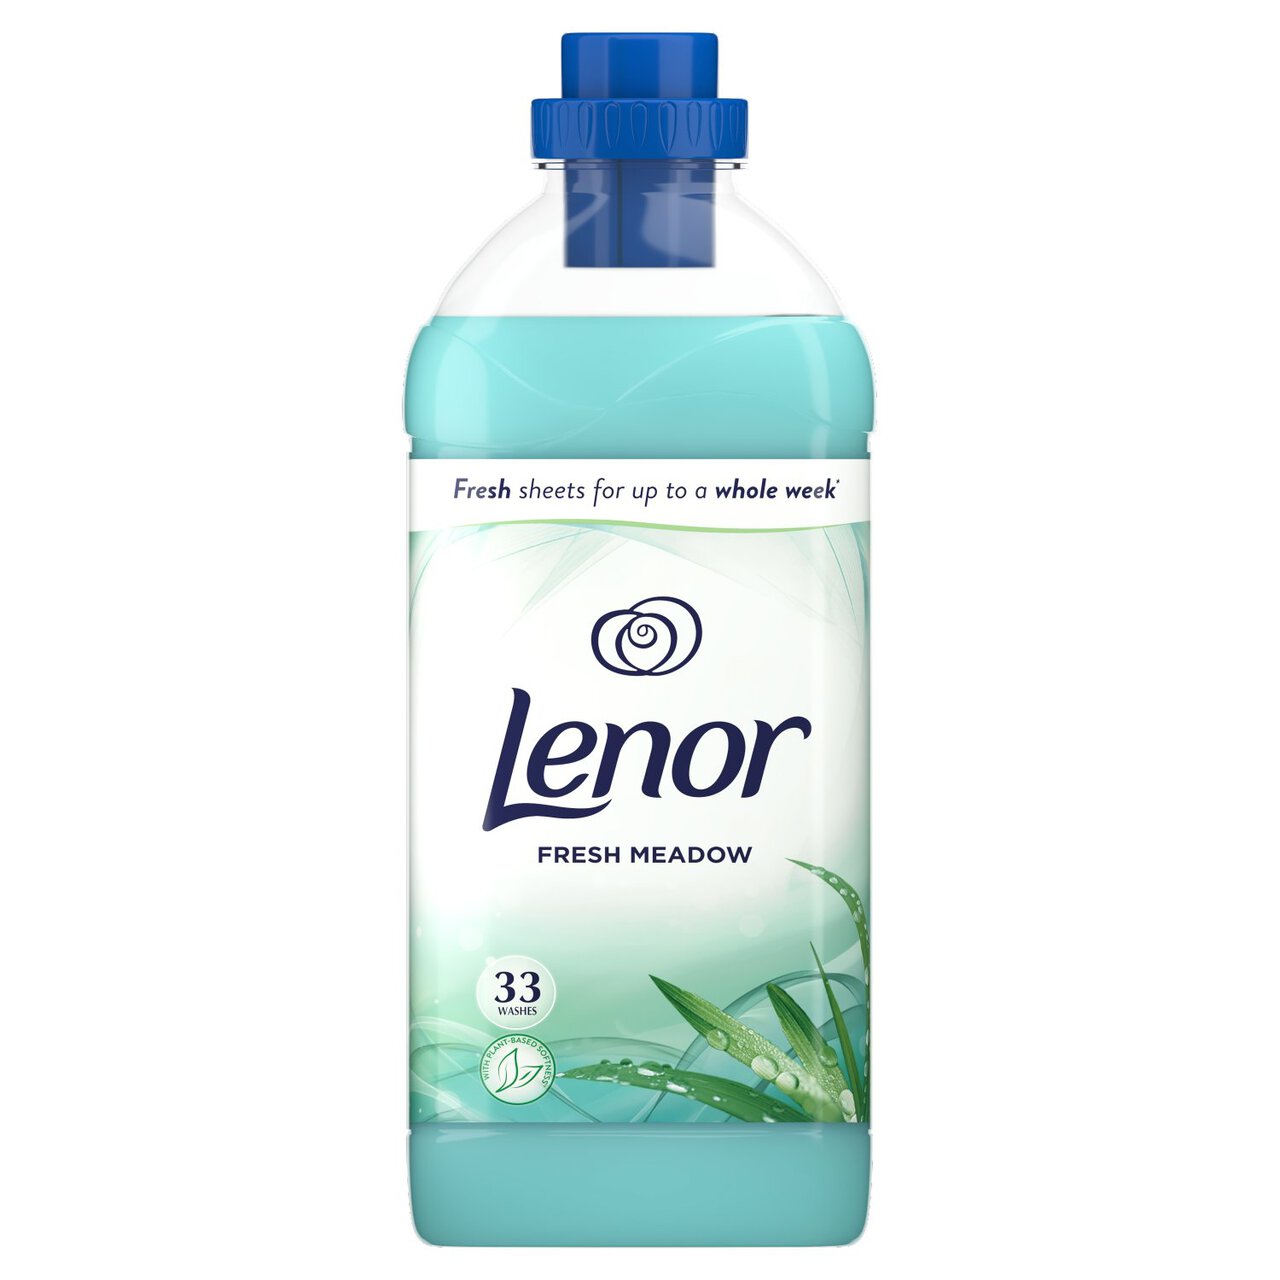 Lenor Fabric Conditioner Fresh Meadow Scent 34 Washes 1.16l